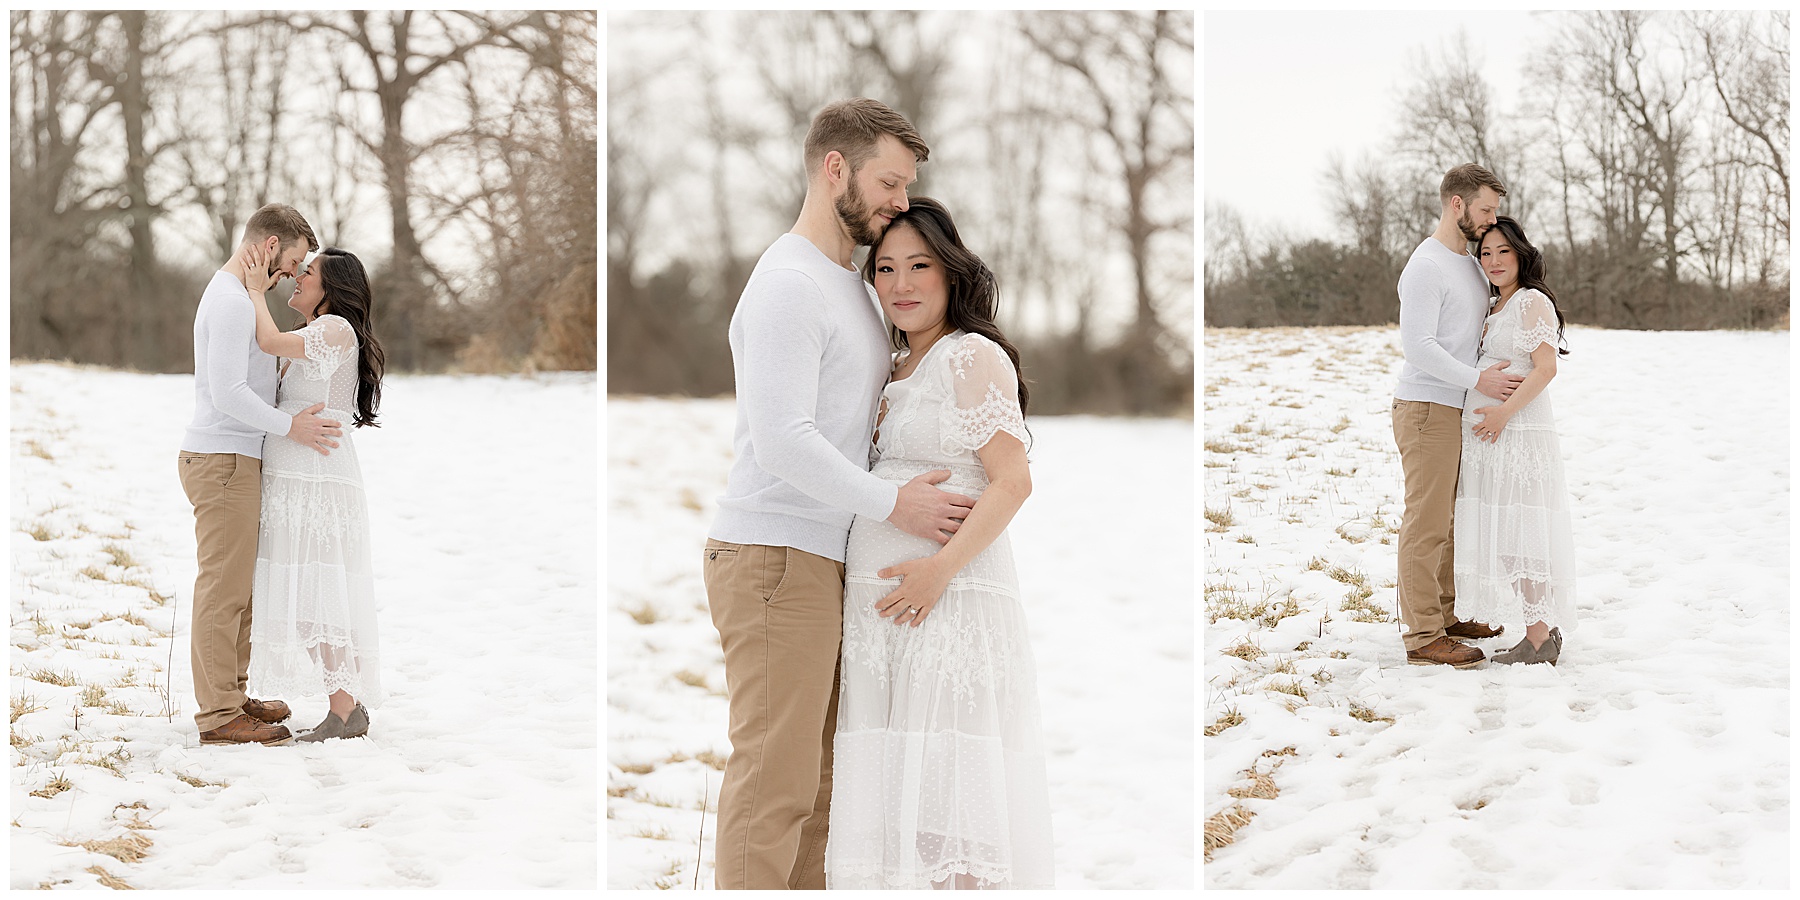 pregnancy photos in the snow at Howard County Conservancy